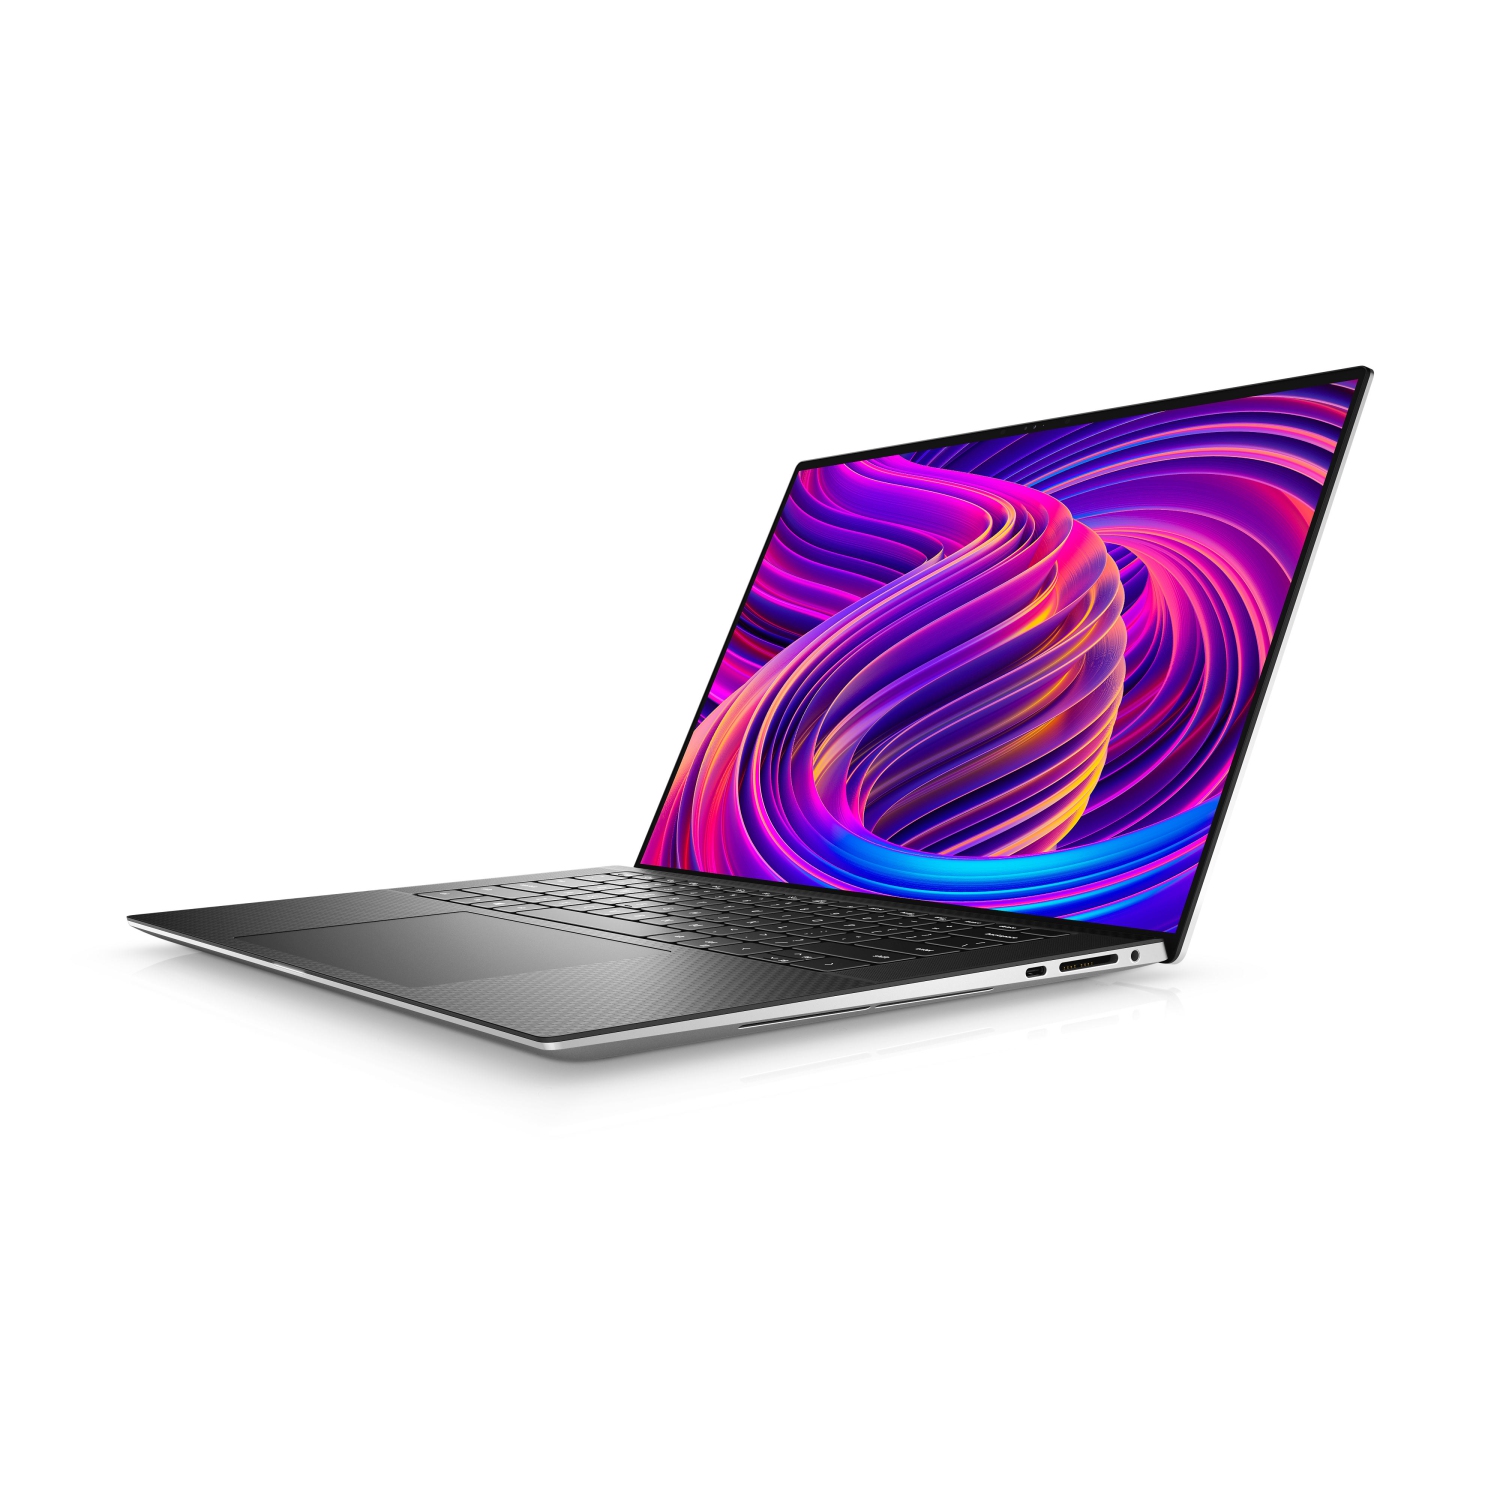 Refurbished (Excellent) - Dell XPS 15 9510 Laptop (2021) | 15.6" FHD+ | Core i9 - 2TB SSD - 64GB RAM - 3050 Ti | 8 Cores @ 4.9 GHz - 11th Gen CPU Certified Refurbished